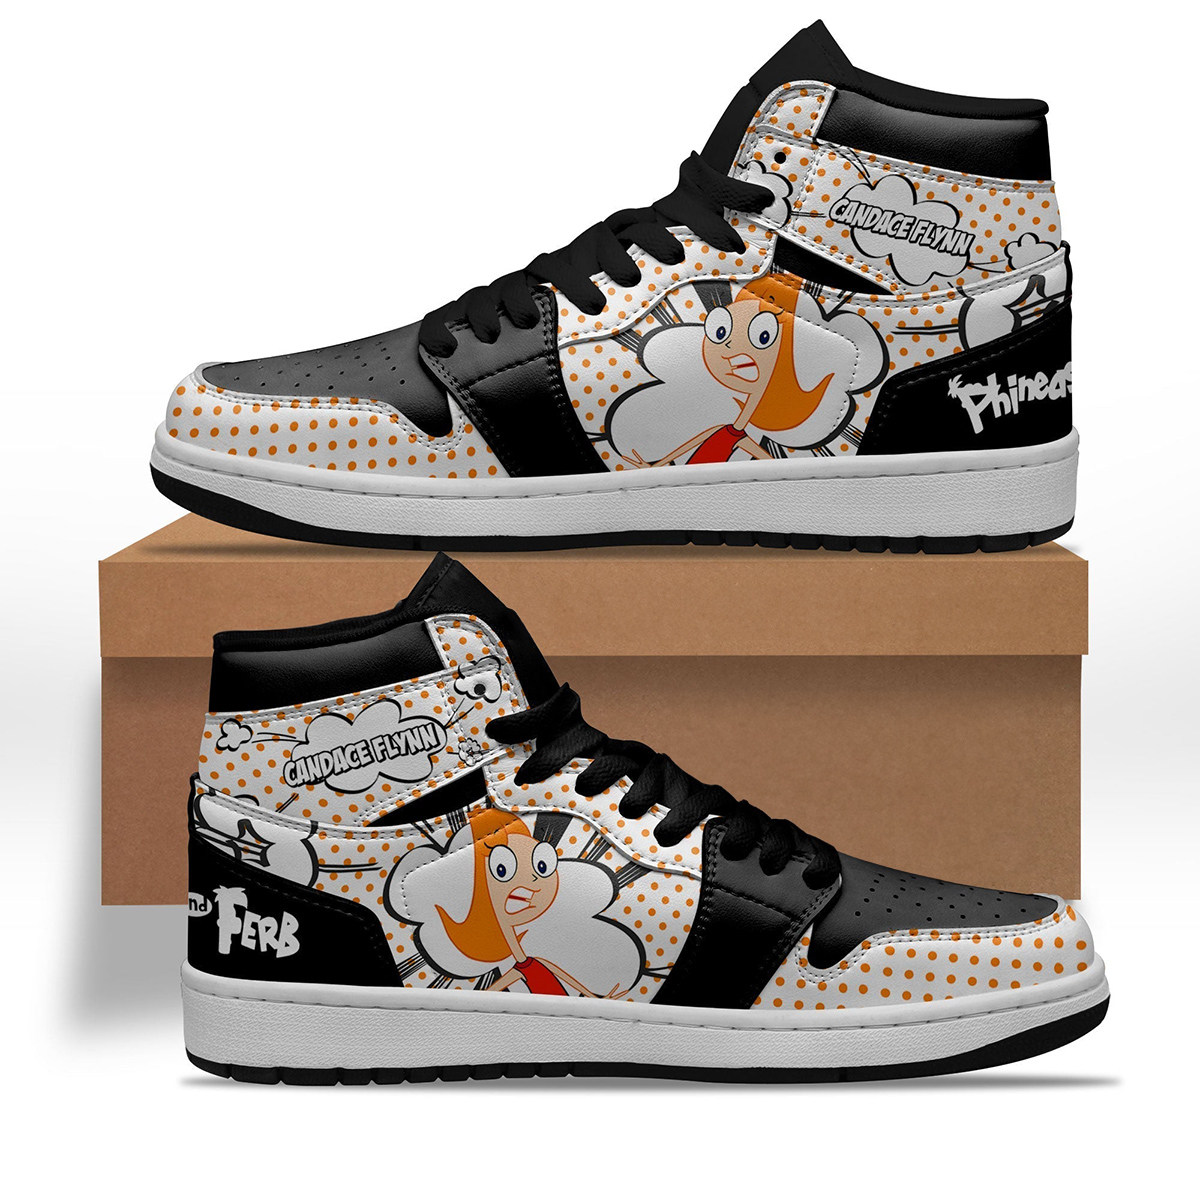 Candace Flynn Sneakers Custom Phineas and Ferb Shoes